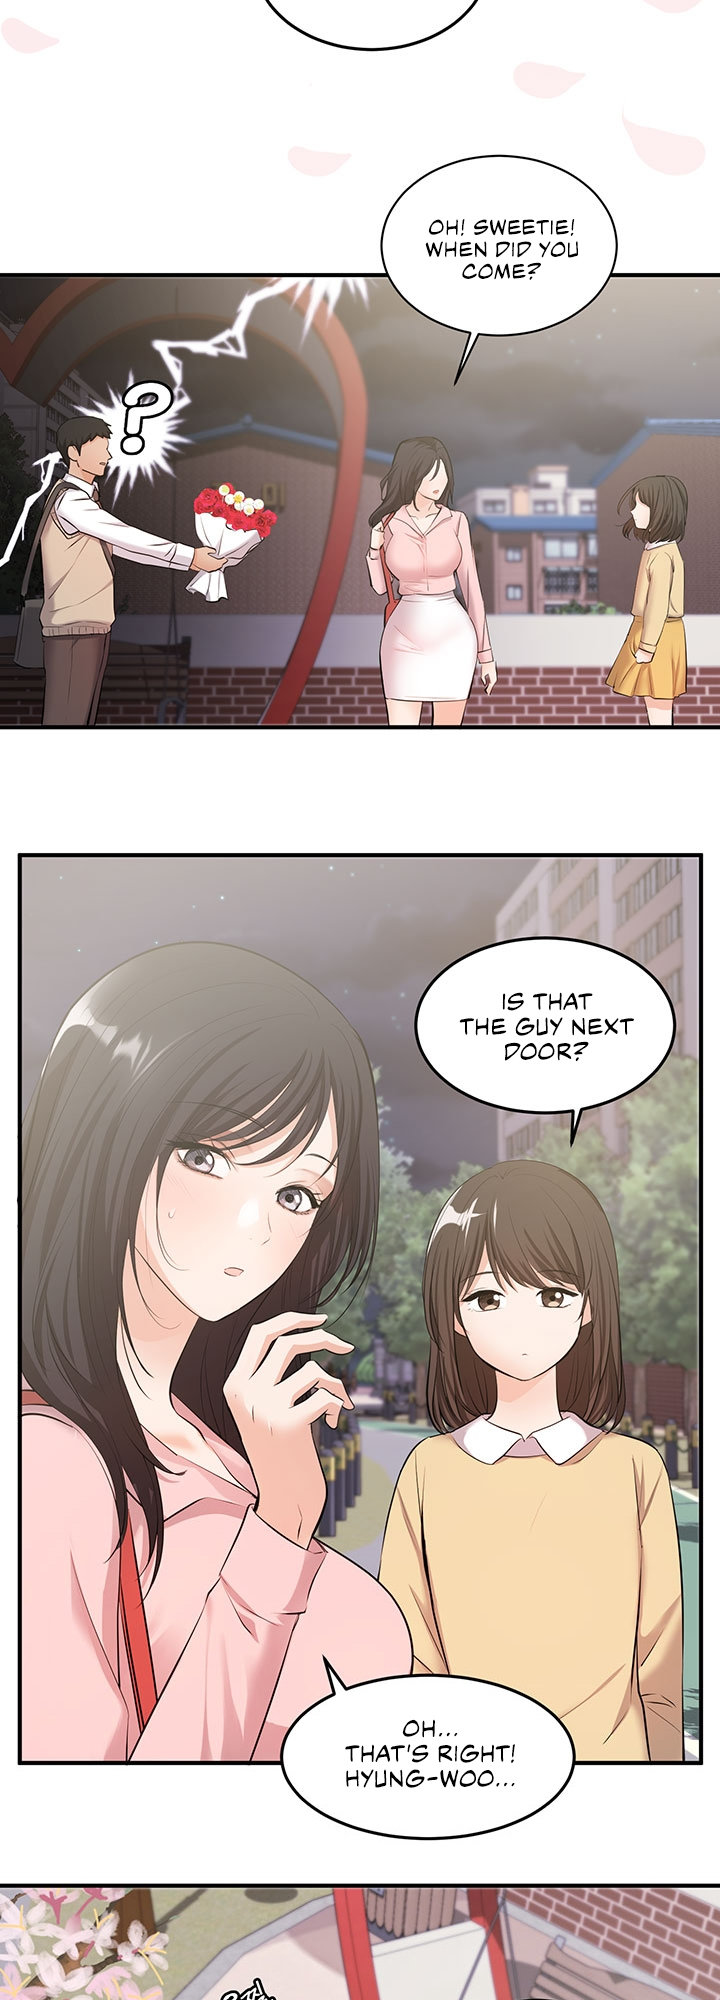 #Dense #Summer #Firstlove - Chapter 1 Page 9